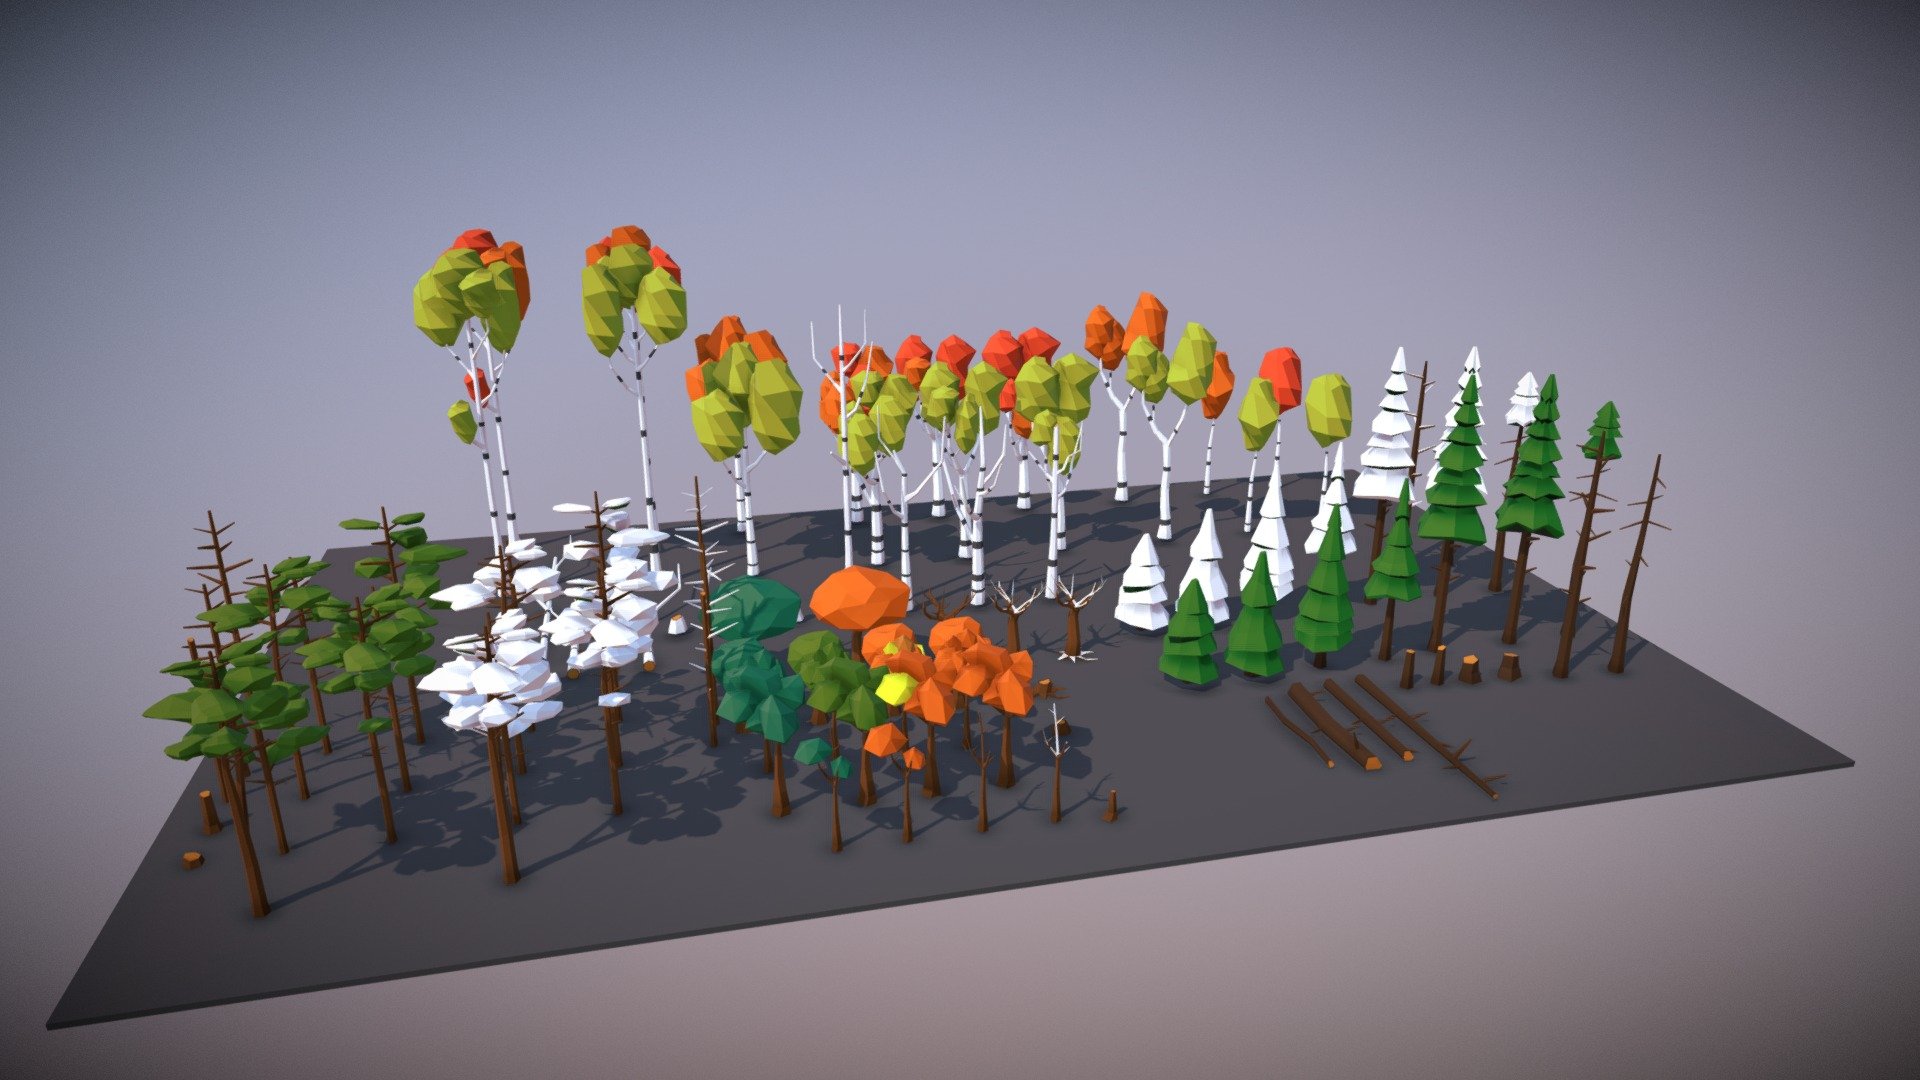 [LOW-POLYVERSE] Low Poly Trees!

The package includes over 90 assets for use in your games or nature scenes.All models share a single texture atlas.
Enjoy!

Also, unitypackage provided in the zip file with drag-and-drop prefabs 3d model